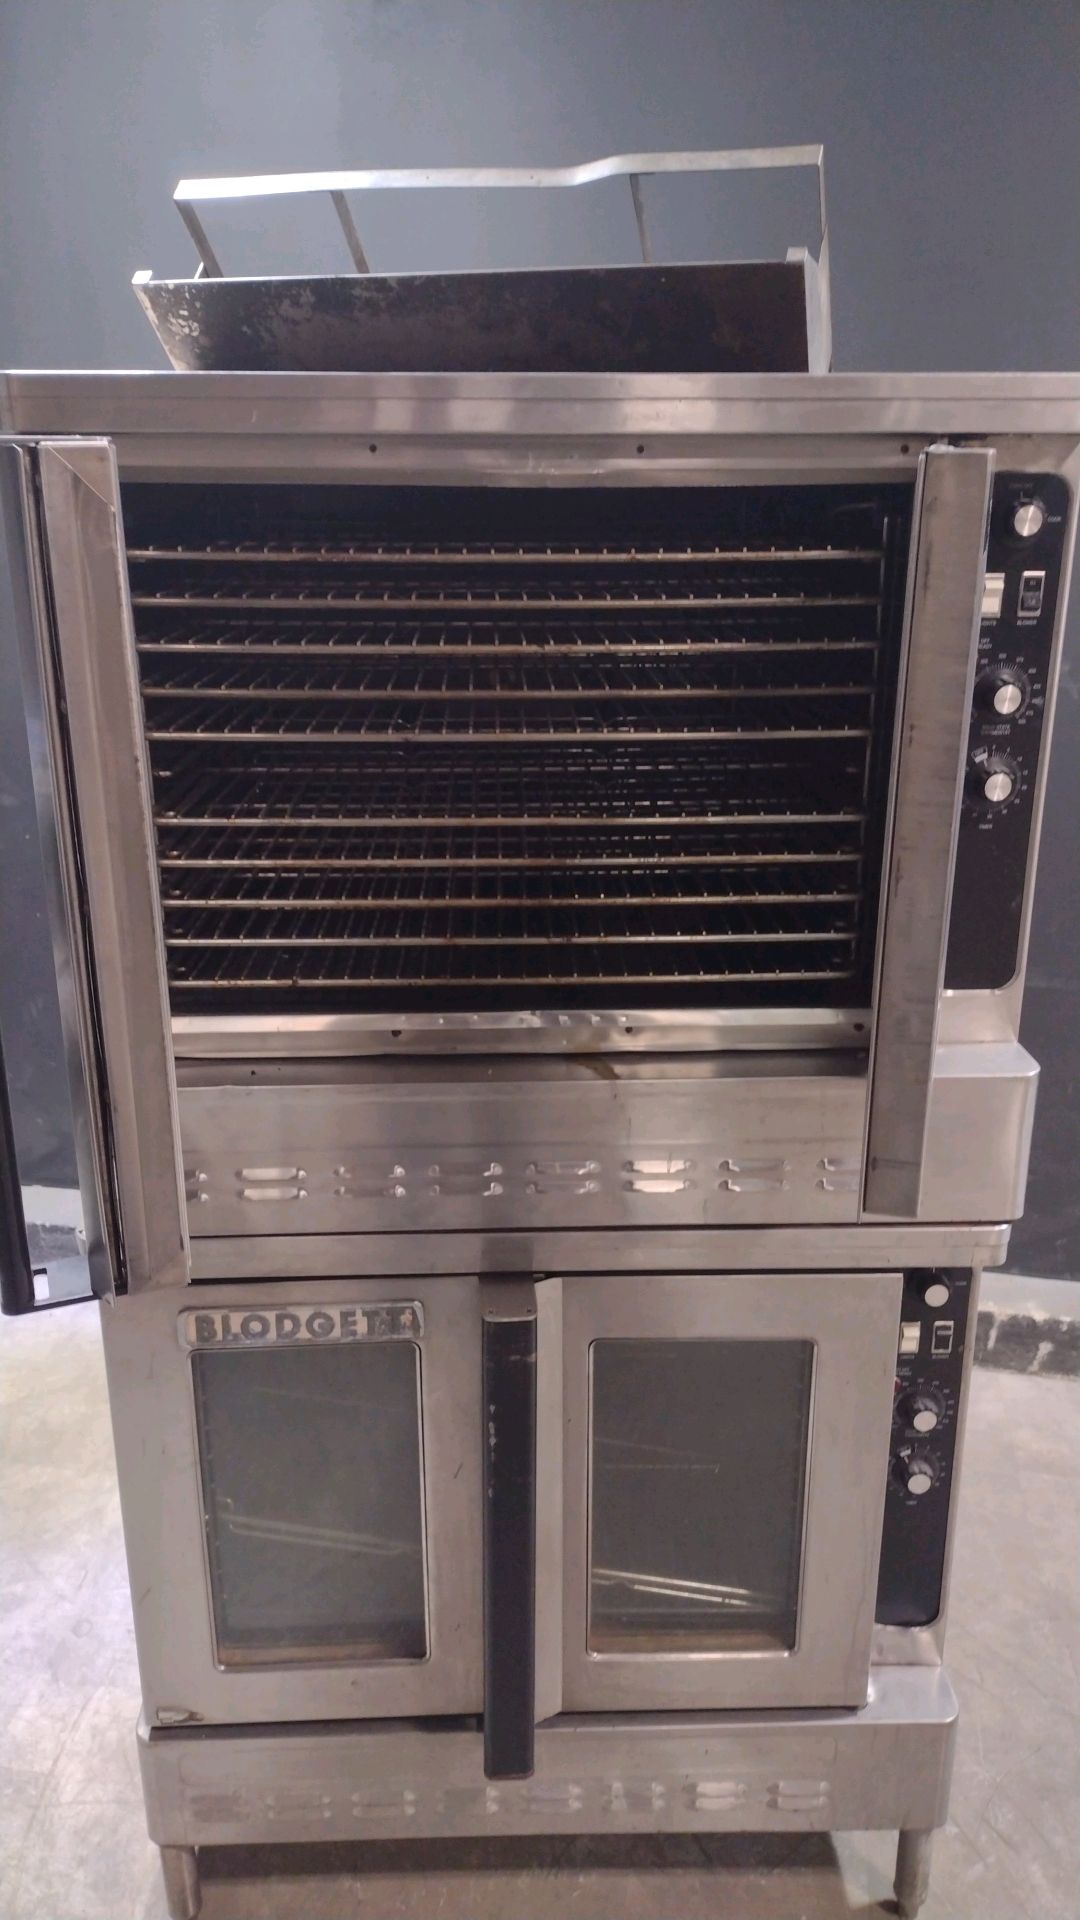 BLODGETT DOUBLE FULL SIZE CONVECTION OVEN (LOCATED AT 2440 GREENLEAF AVE, ELK GROVE VILLAGE, IL 600 - Bild 3 aus 3